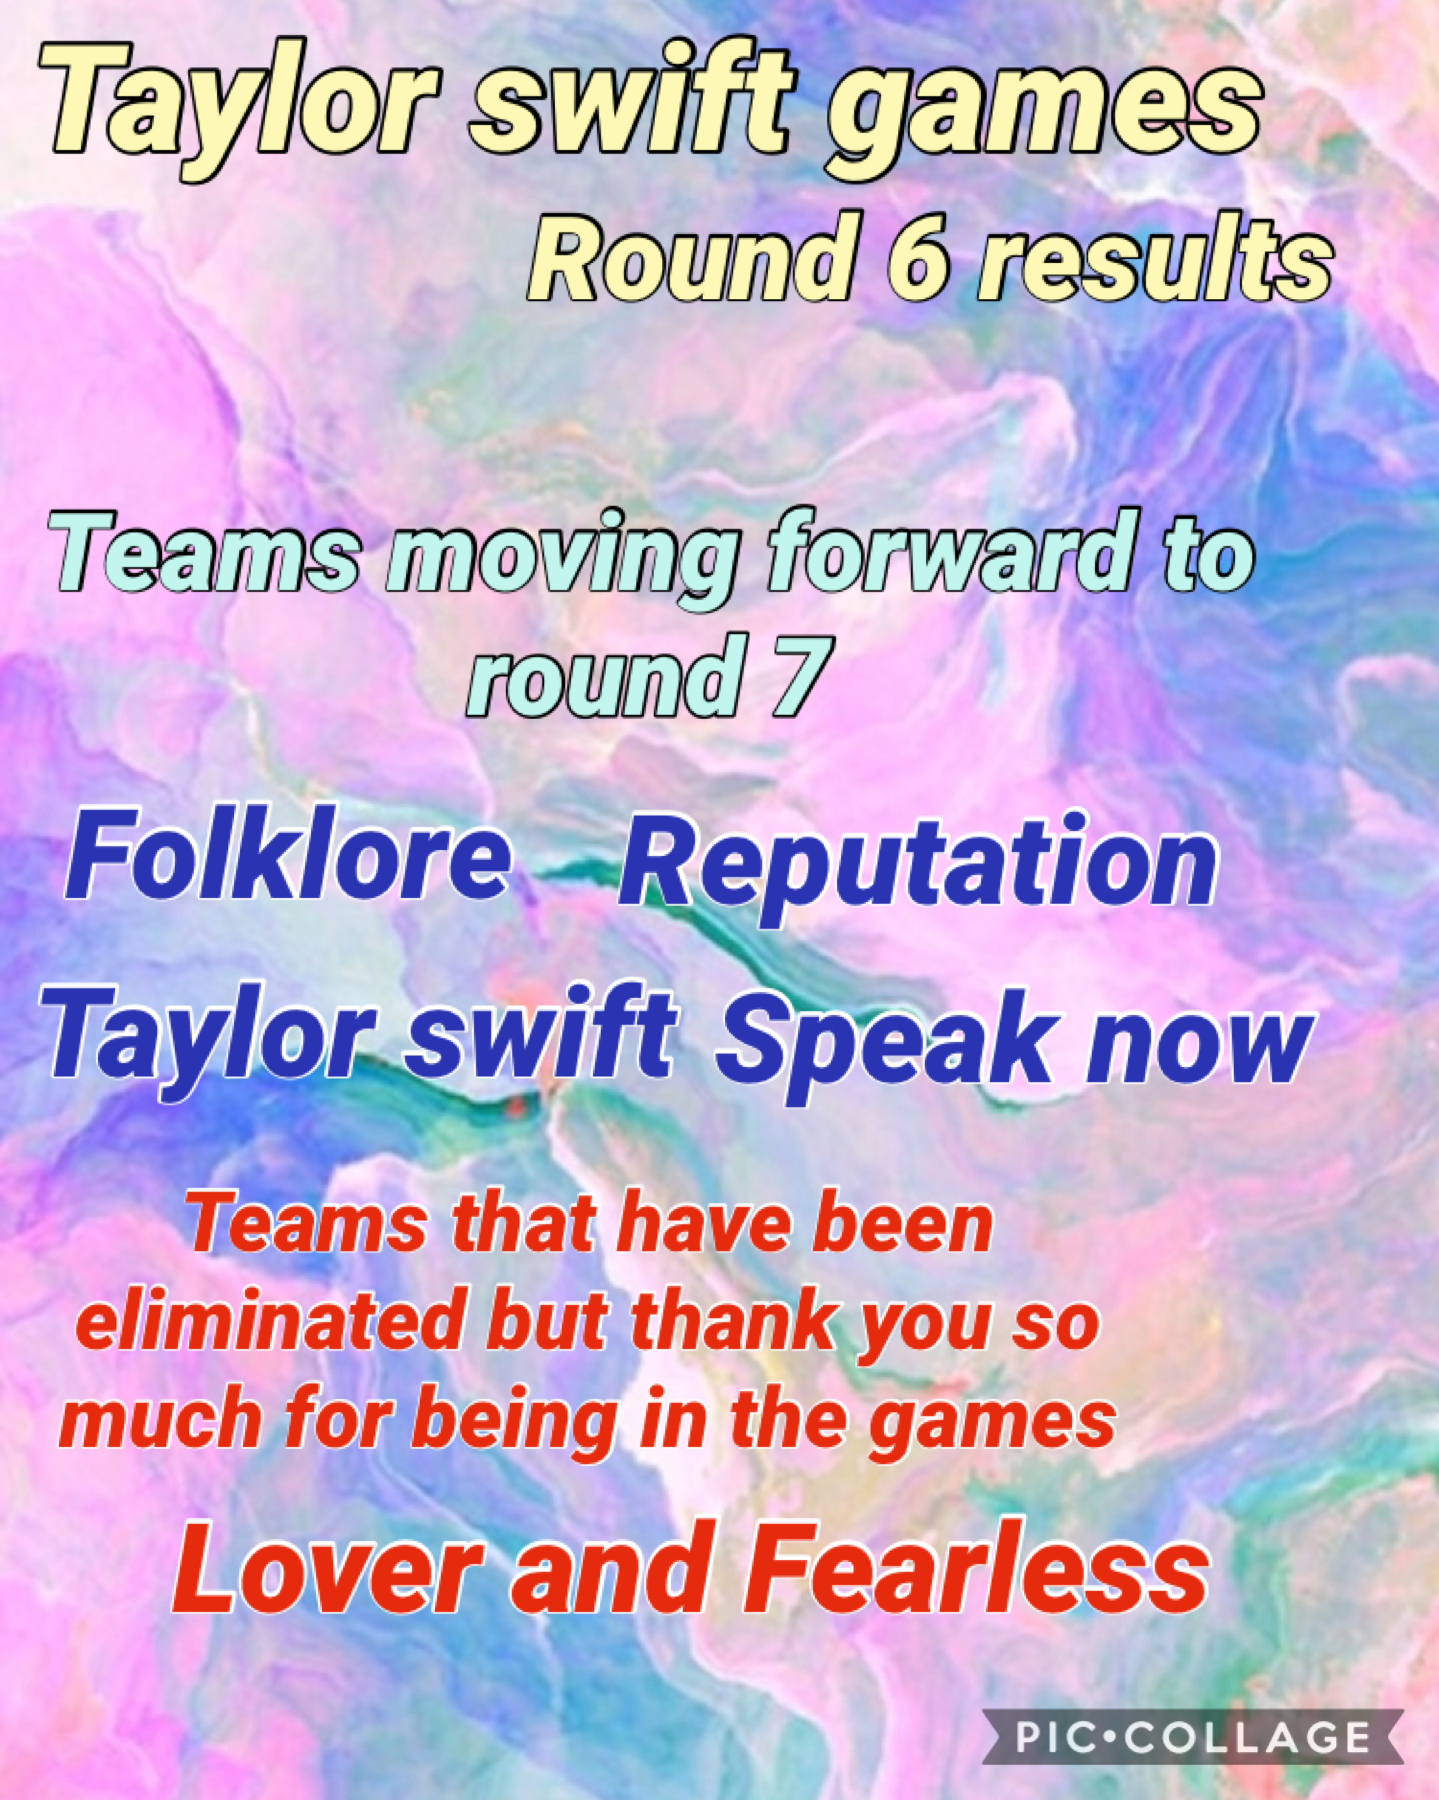 Taylor swift games round 6 results 